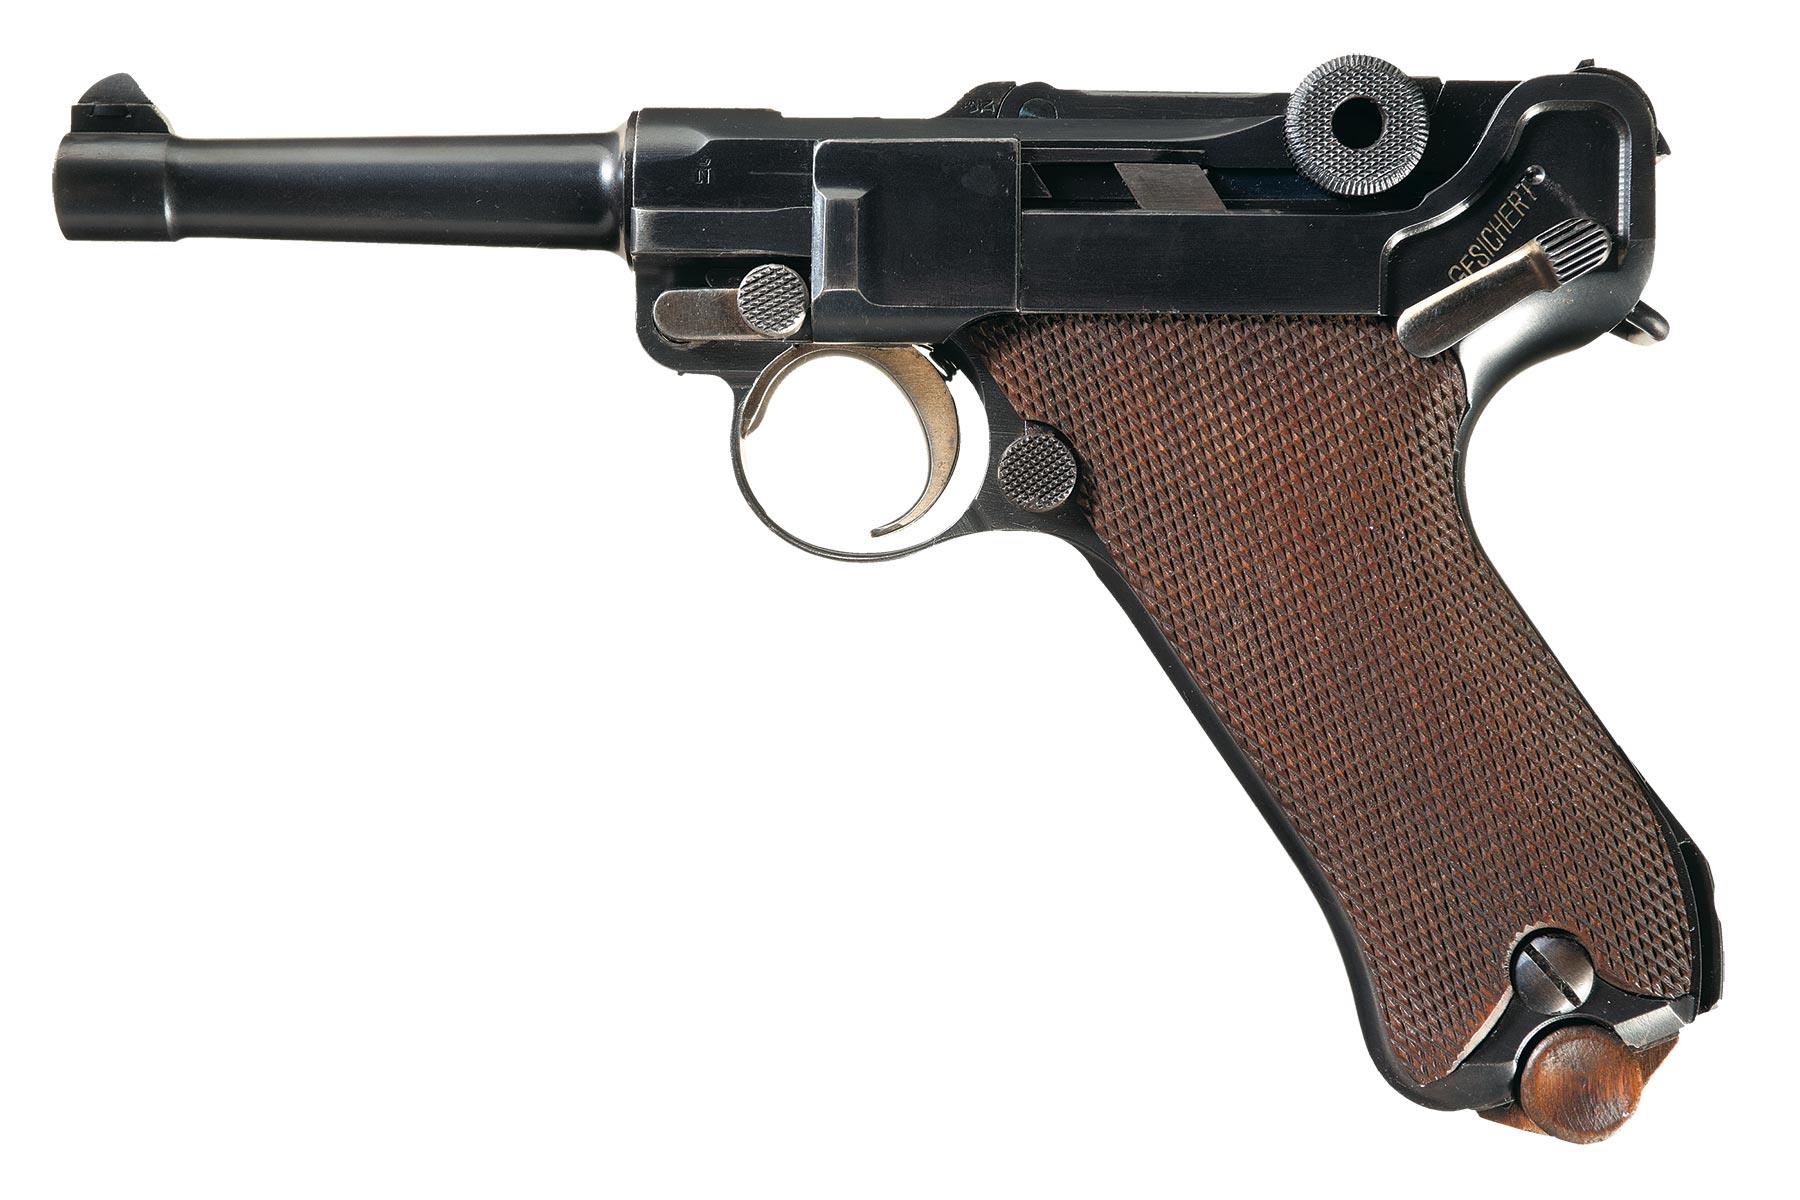 Luger serial number identification